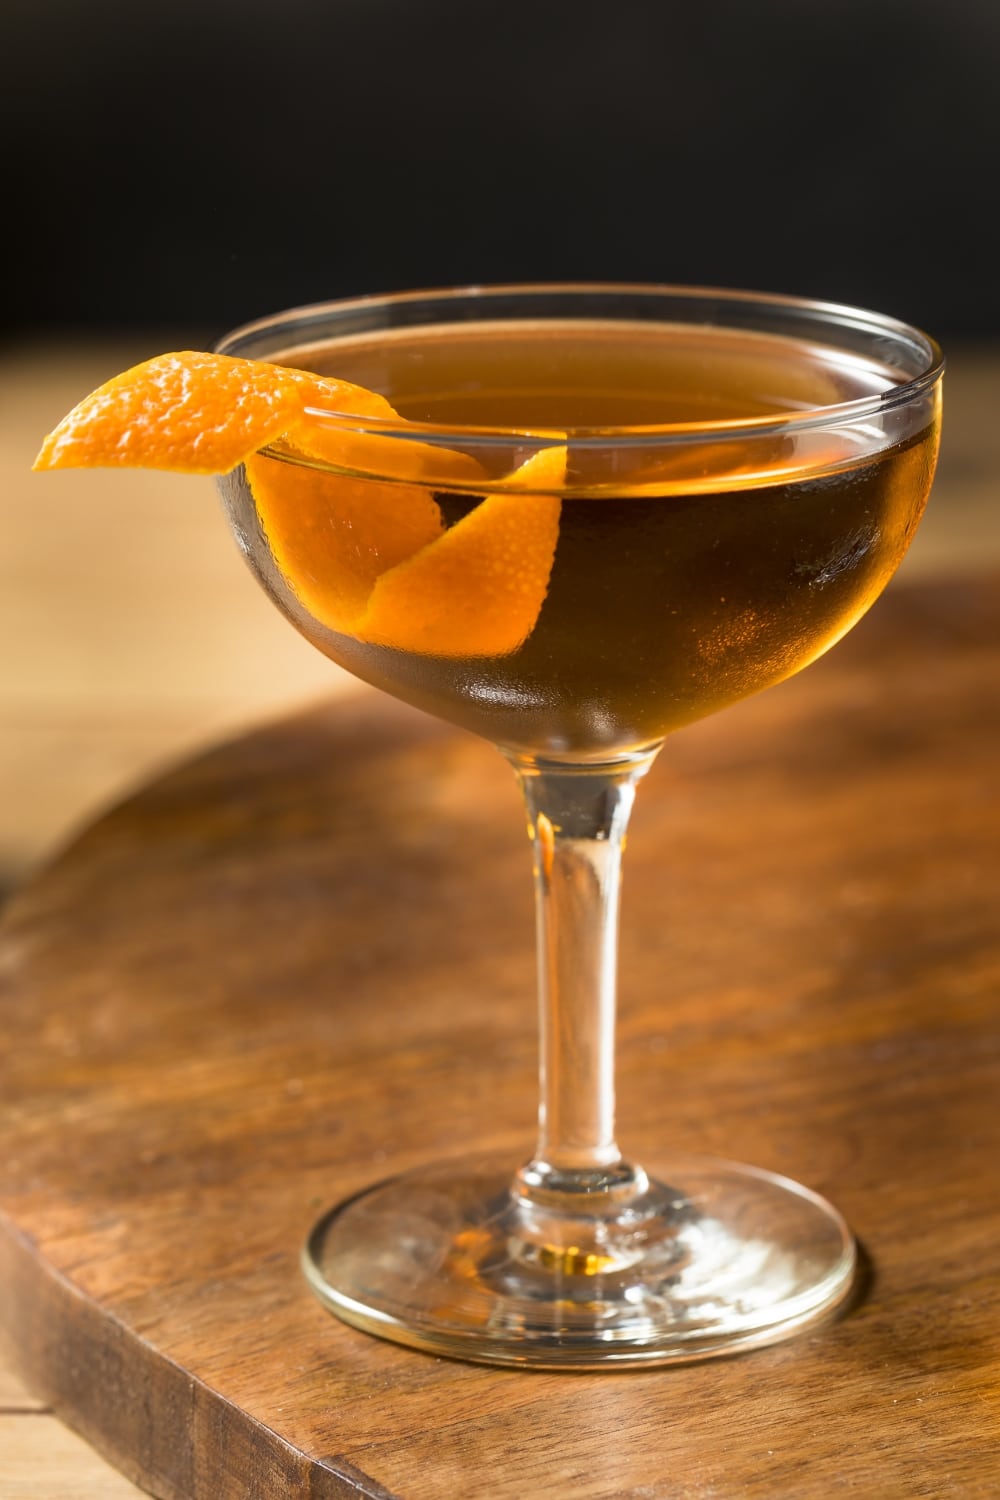 Glass of Hanky Panky Cocktail Garnished With Orange peel